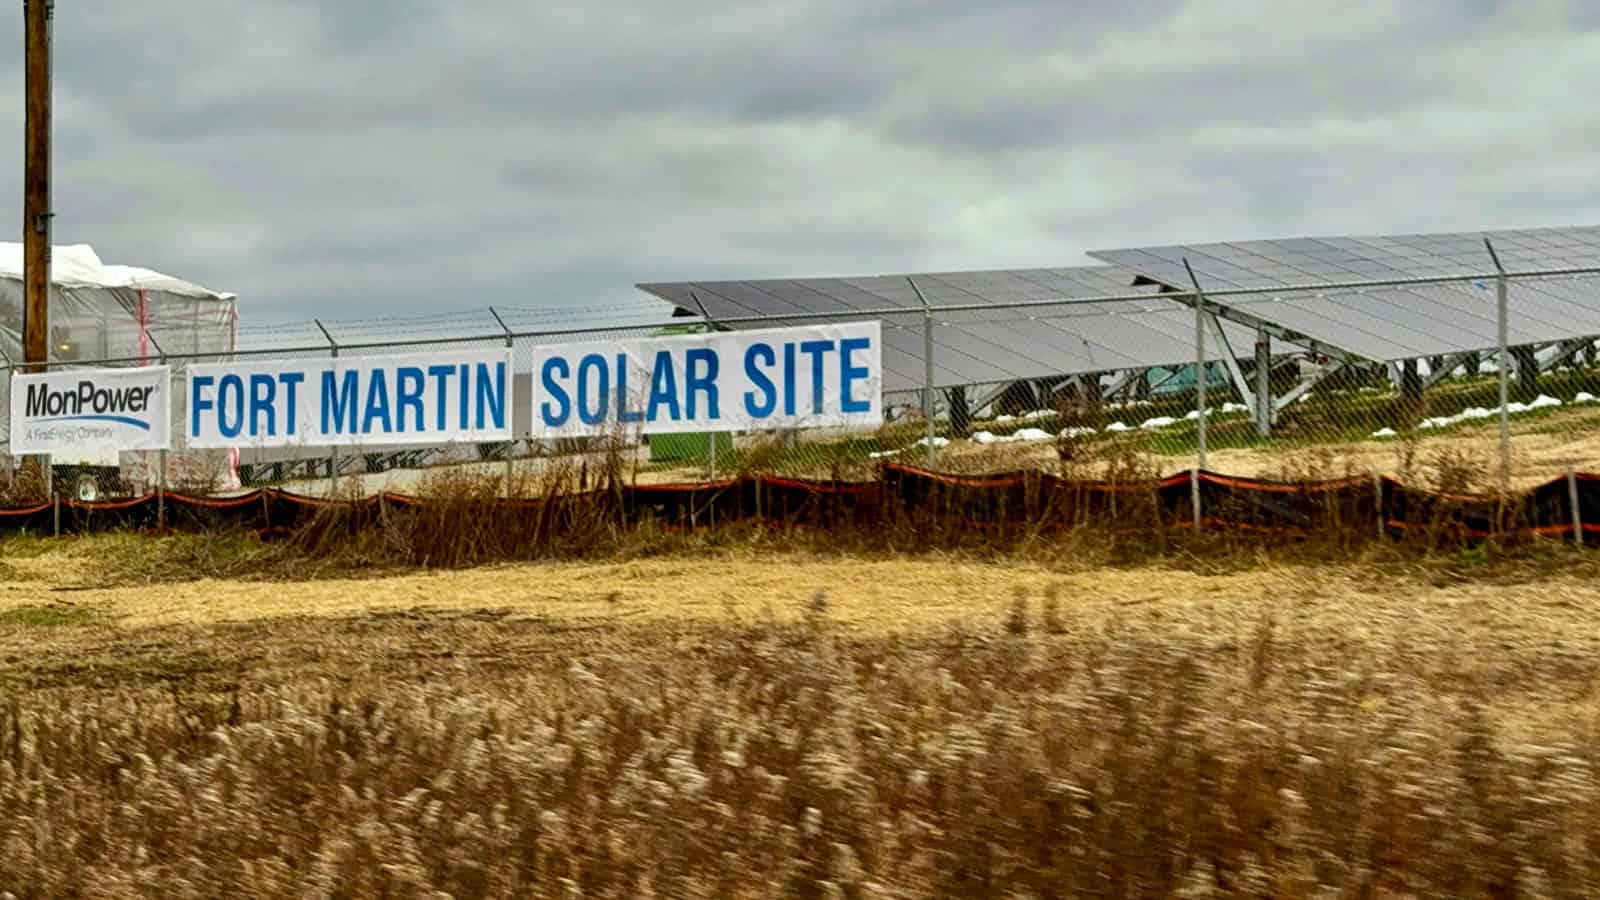 FirstEnergy Corp solar site at fort martin, signs on barbed fence